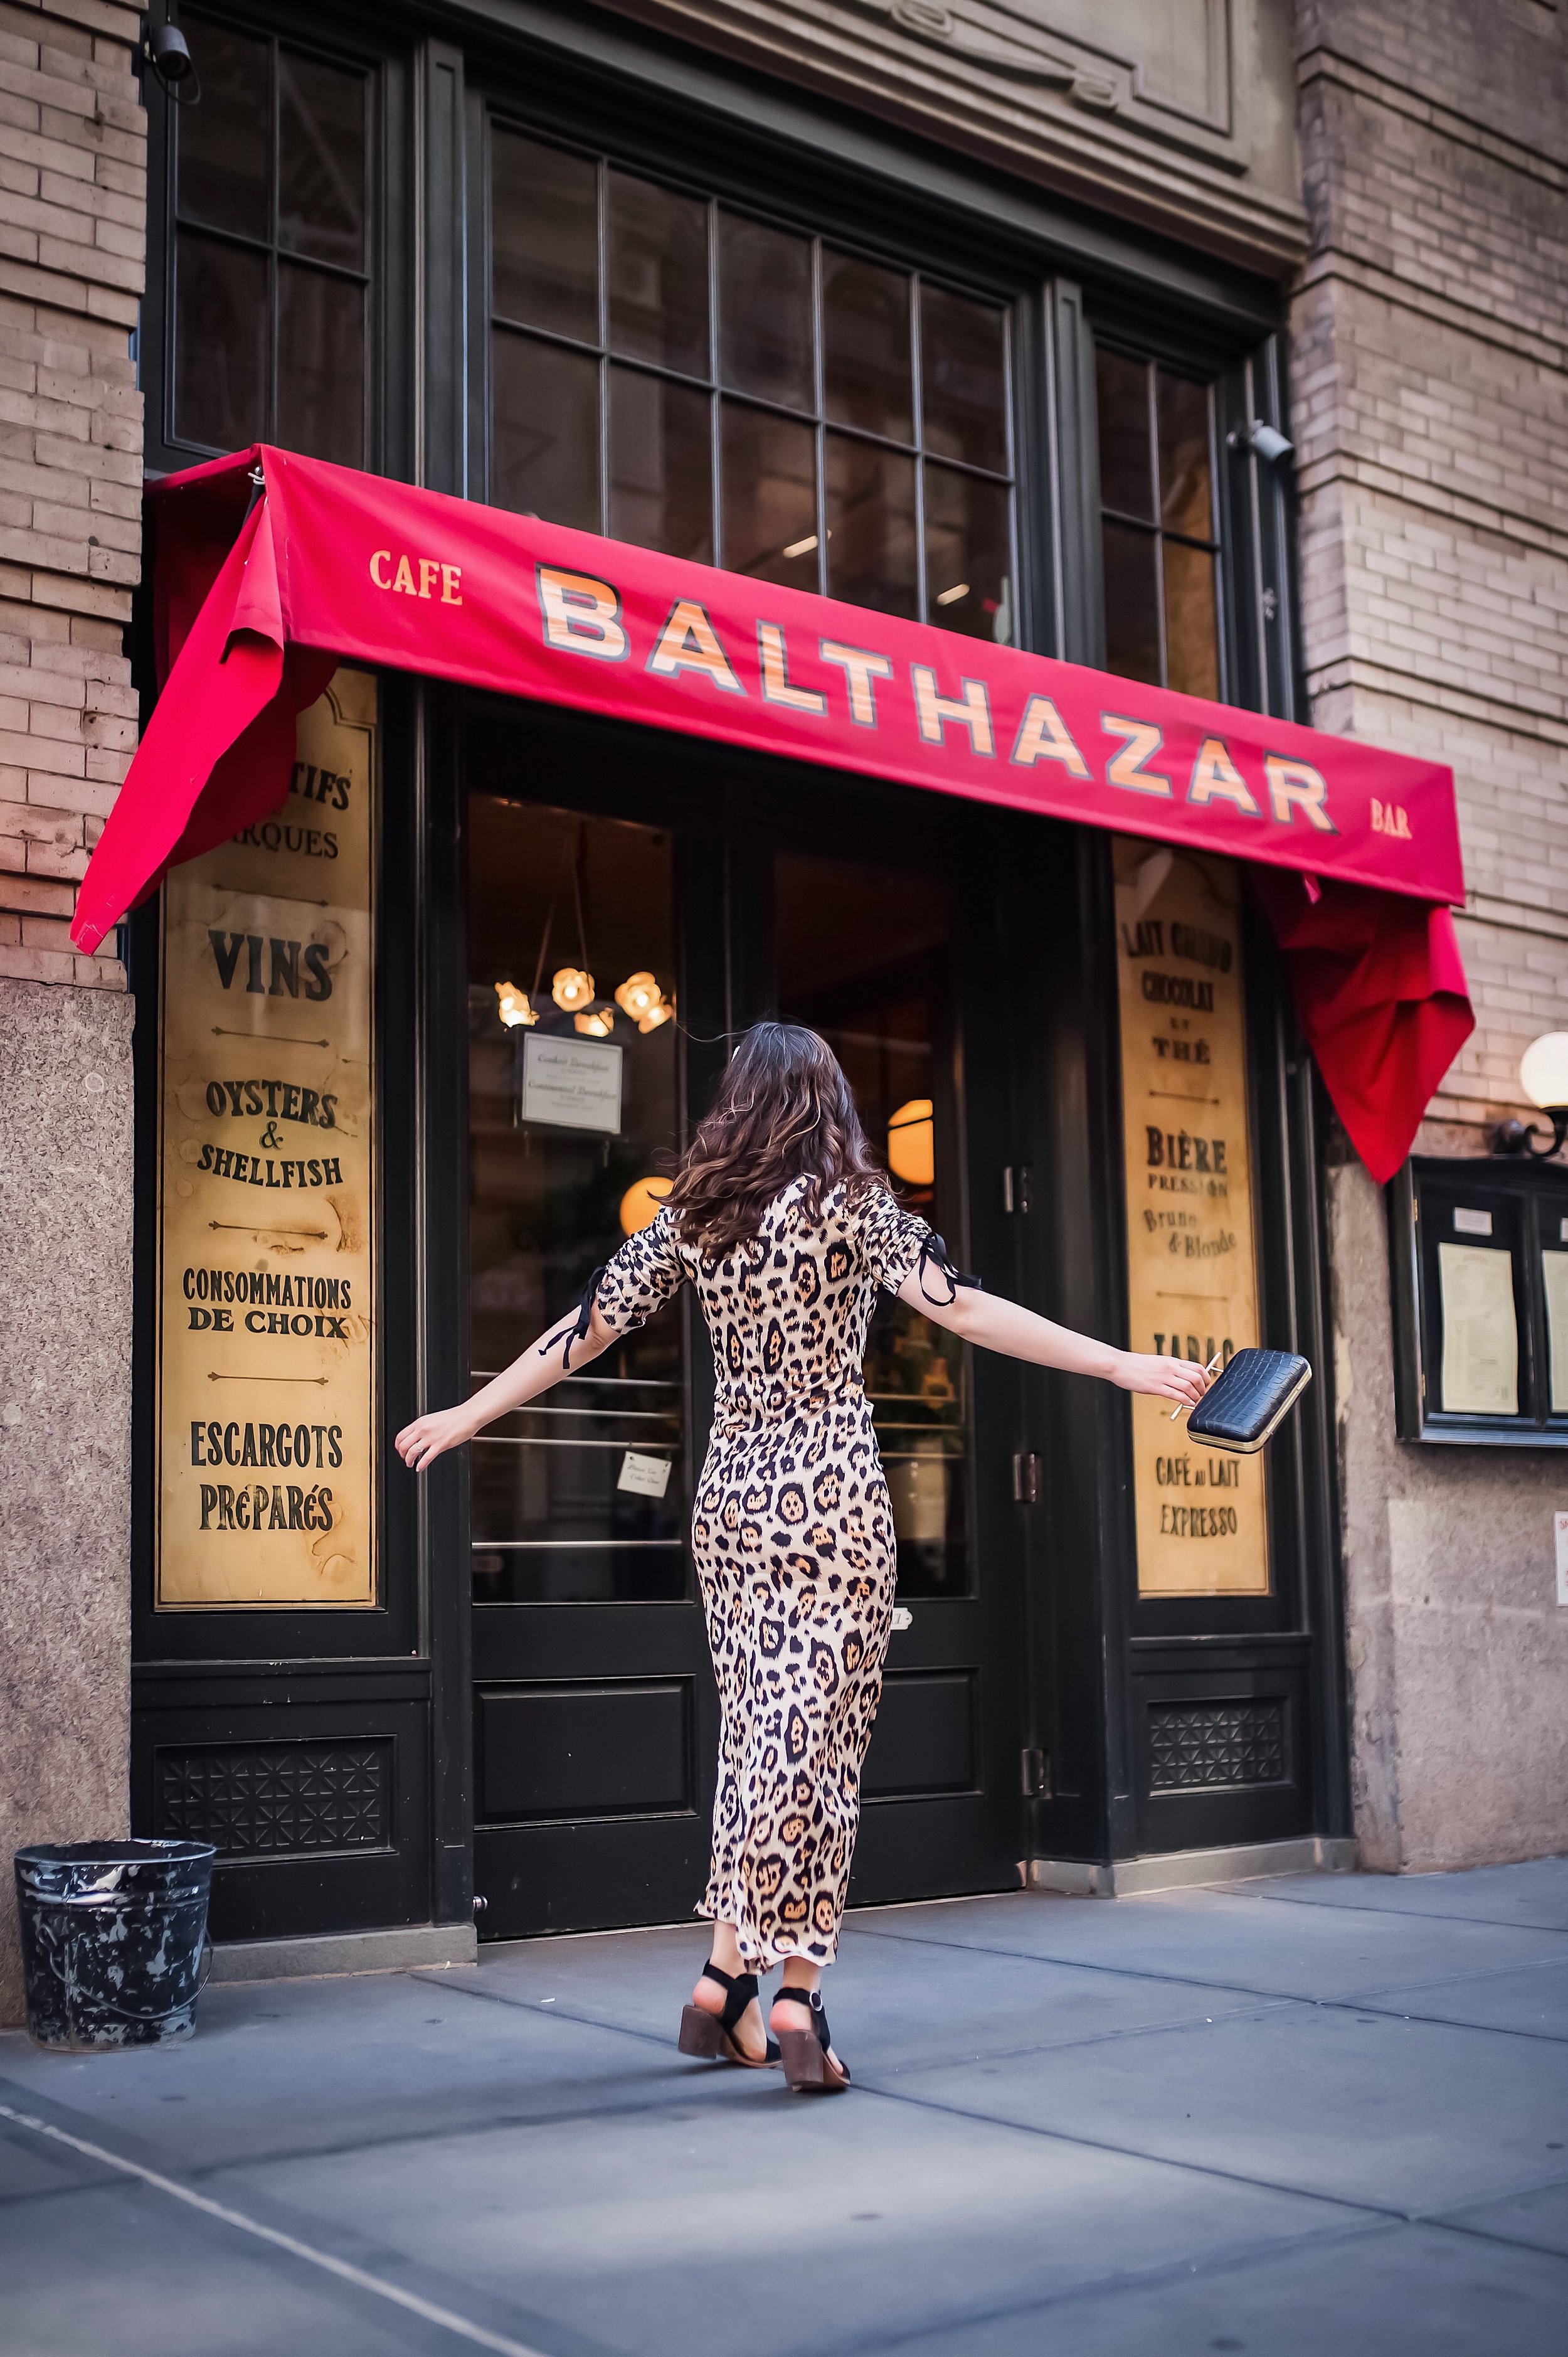 July 3 2019 Leopard Dress Pearl Hair Clips Esther Santer Fashion Blog NYC Street Style Blogger Outfit OOTD Trendy Shopping Girl What How To Wear Cheetah Black Braided Sandals Vince Camuto Balthazar New York City Restaurant Bag Soho Photoshoot Clothing.jpg